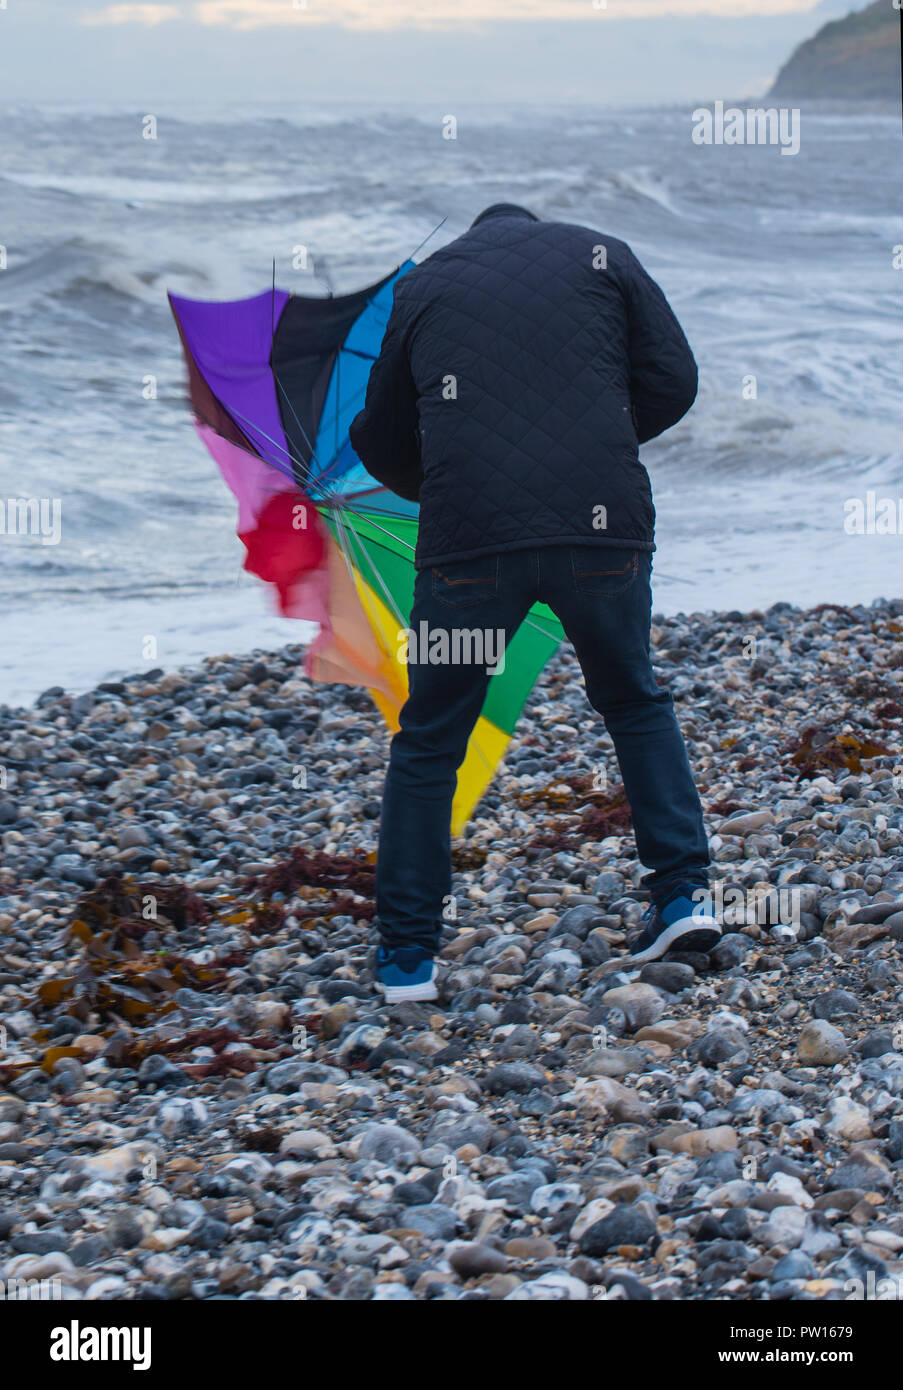 Lyme Regis, Dorset, UK. 11th October 2018.  UK Weather:   A man battles with an umbrella on the beach as gusty high winds and outbreaks of rain hit the coastal resort of Lyme Regis ahead of Storm Callum.  Credit: Celia McMahon/Alamy Live News Stock Photo